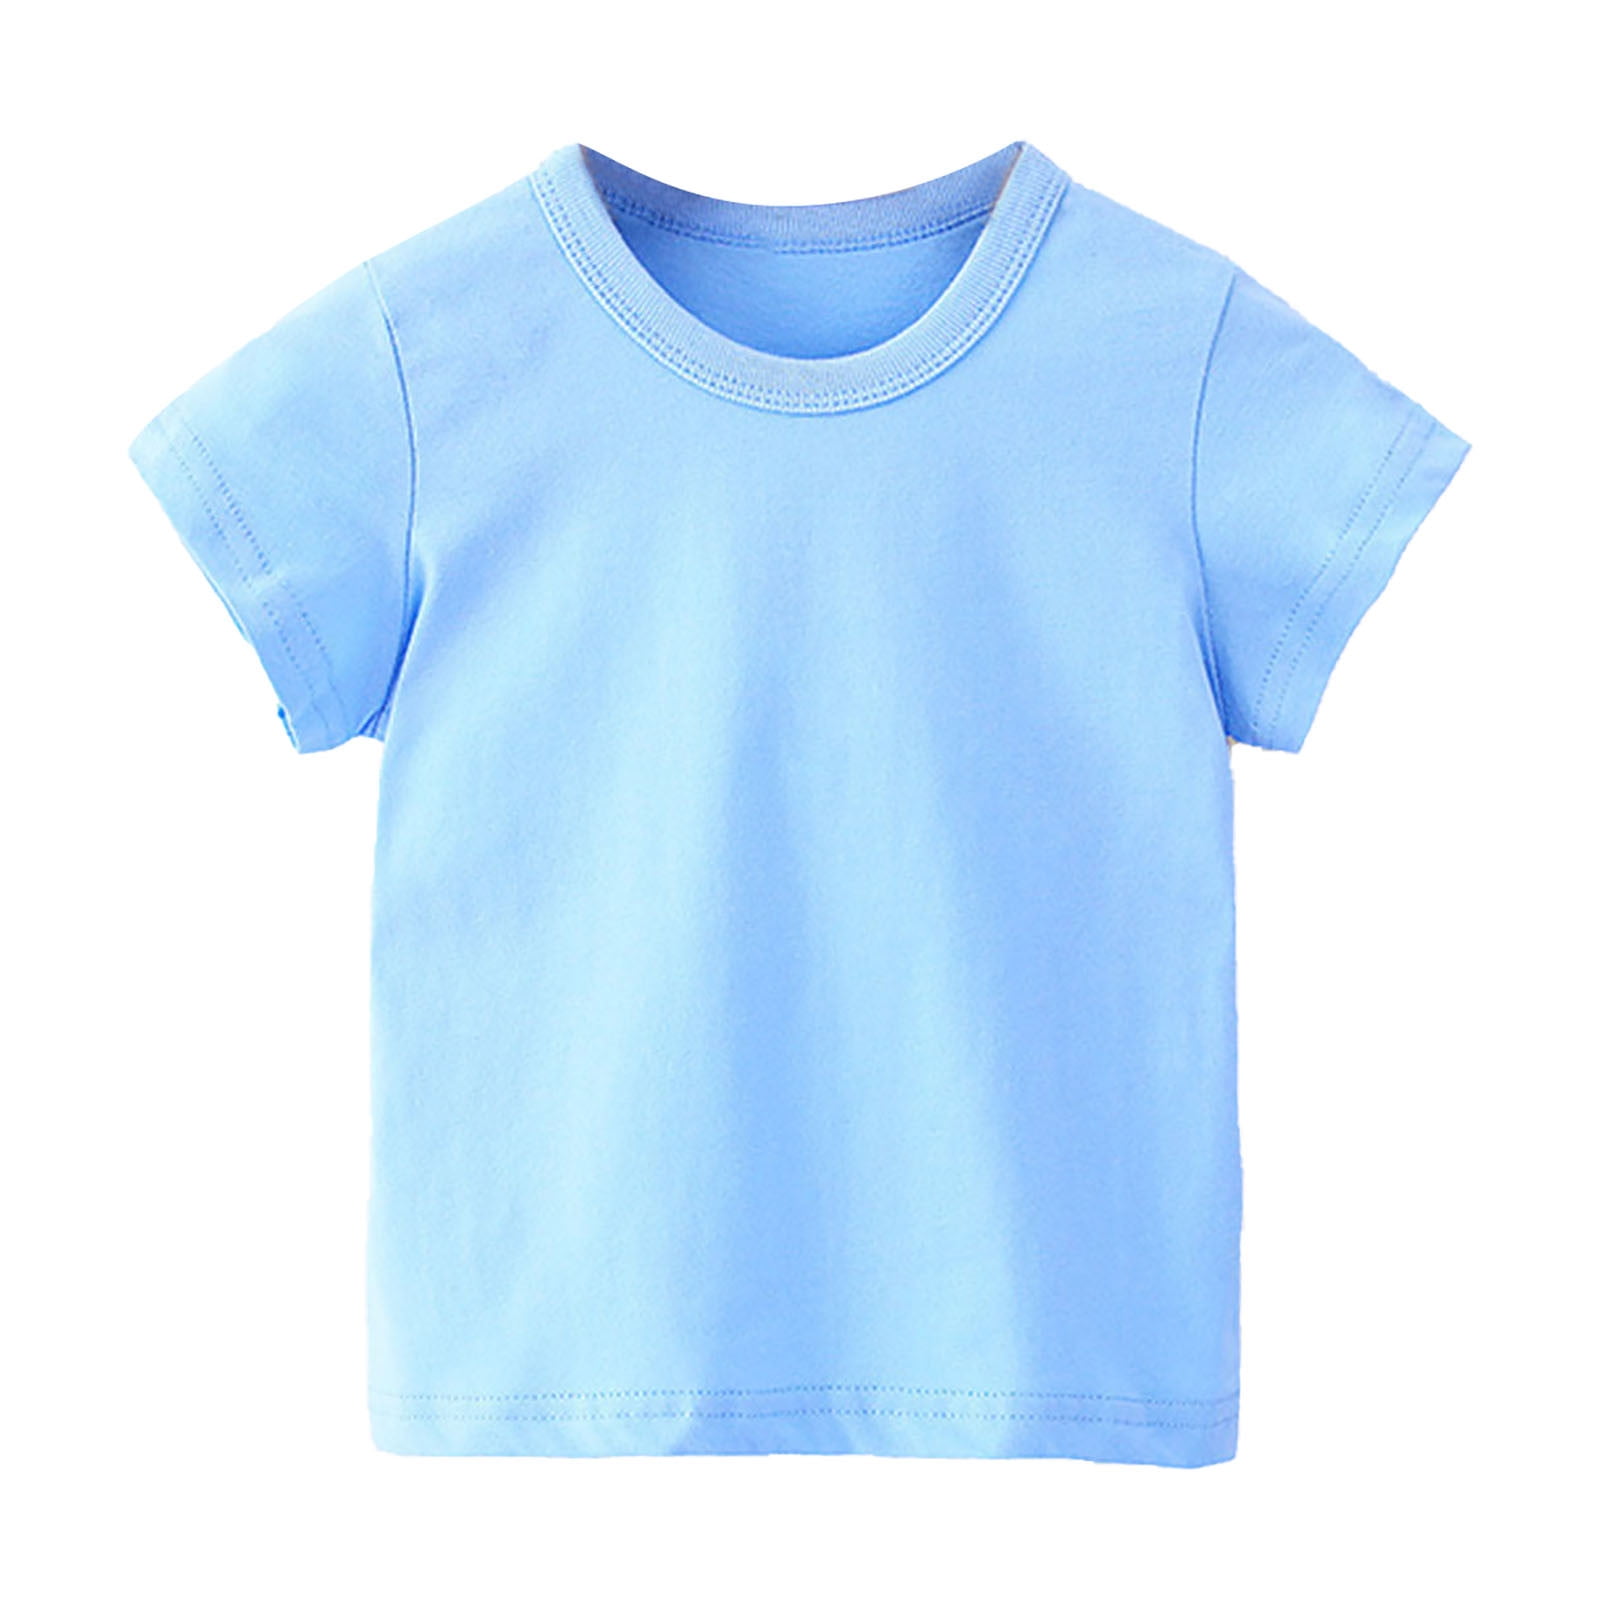 Sentuca Cotton Basic T Shirts for Toddler Baby Boys Girl Soft Solid ...